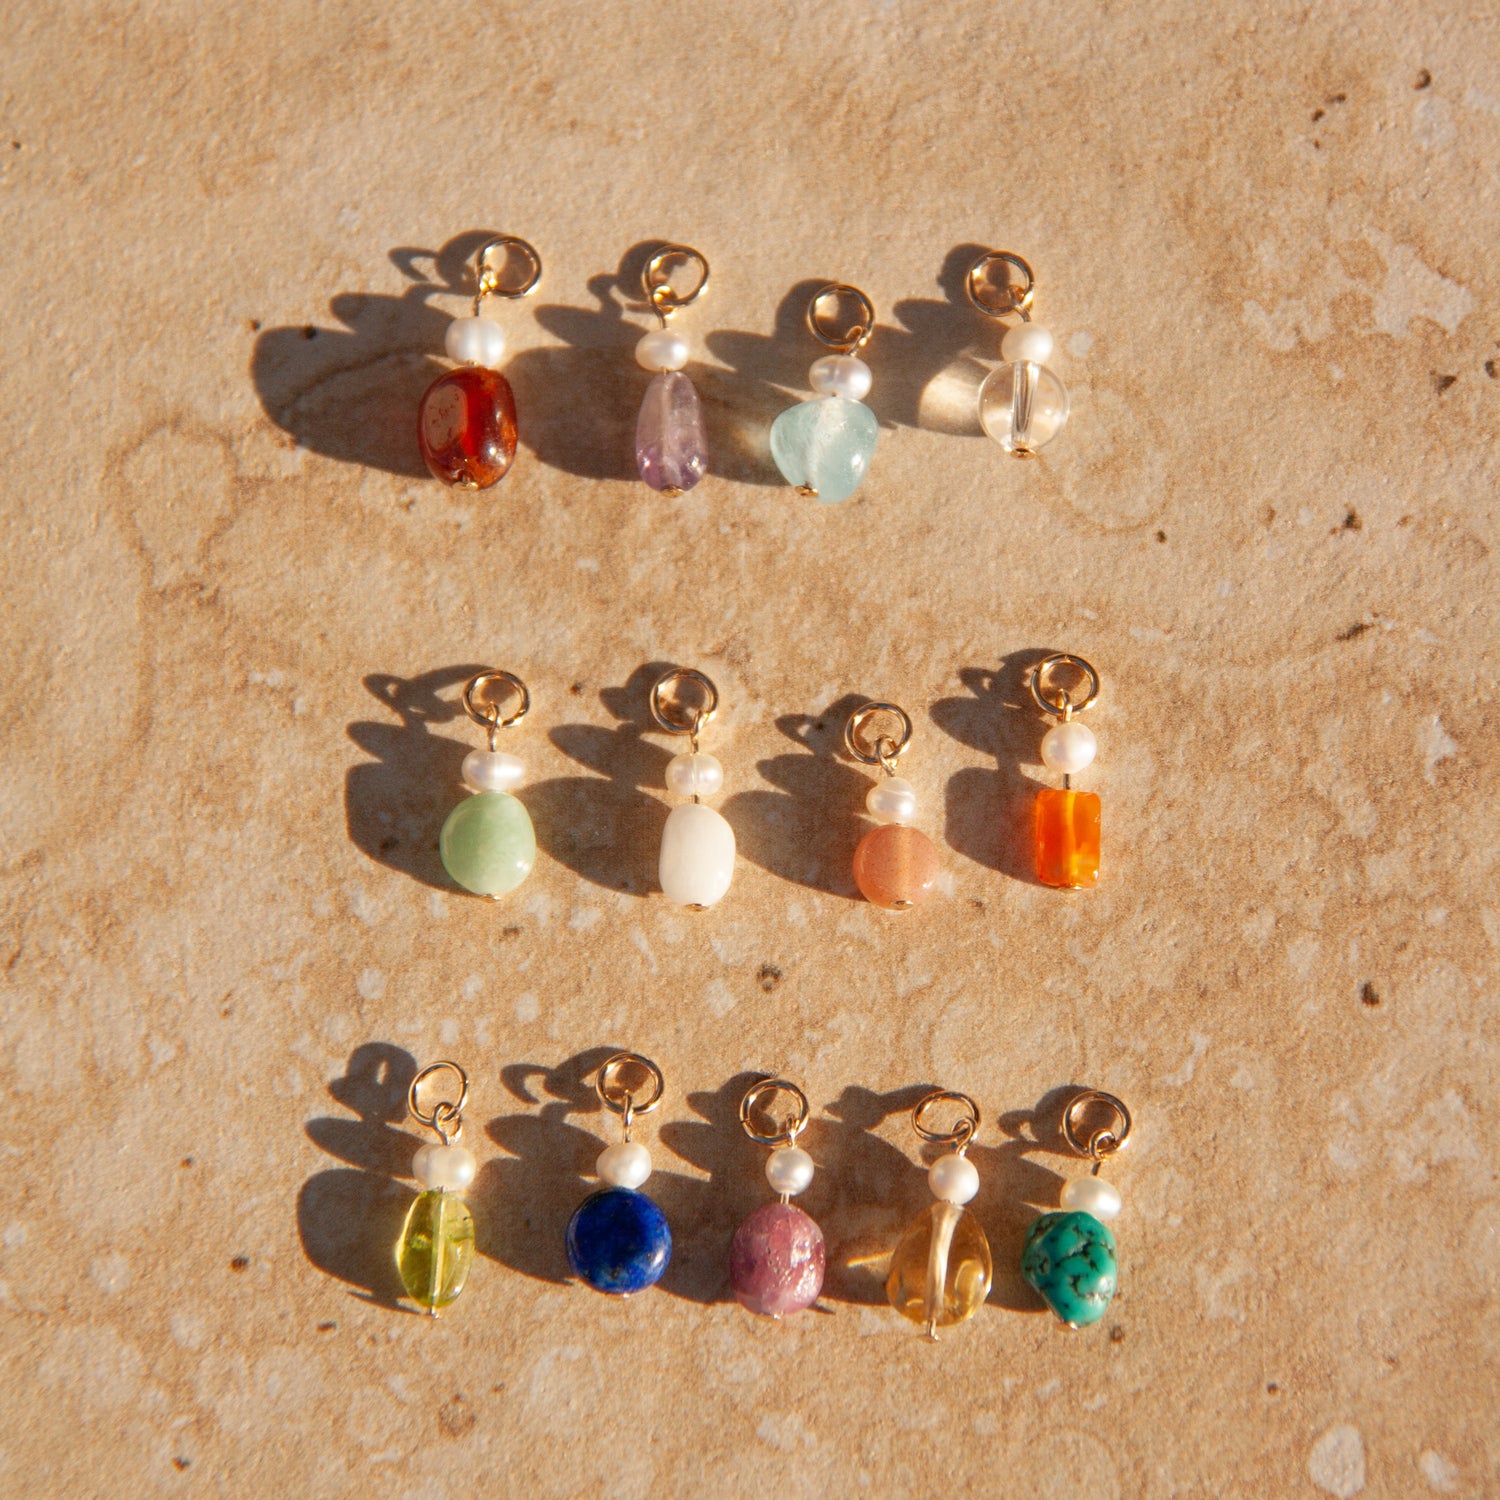 Birthstone collection